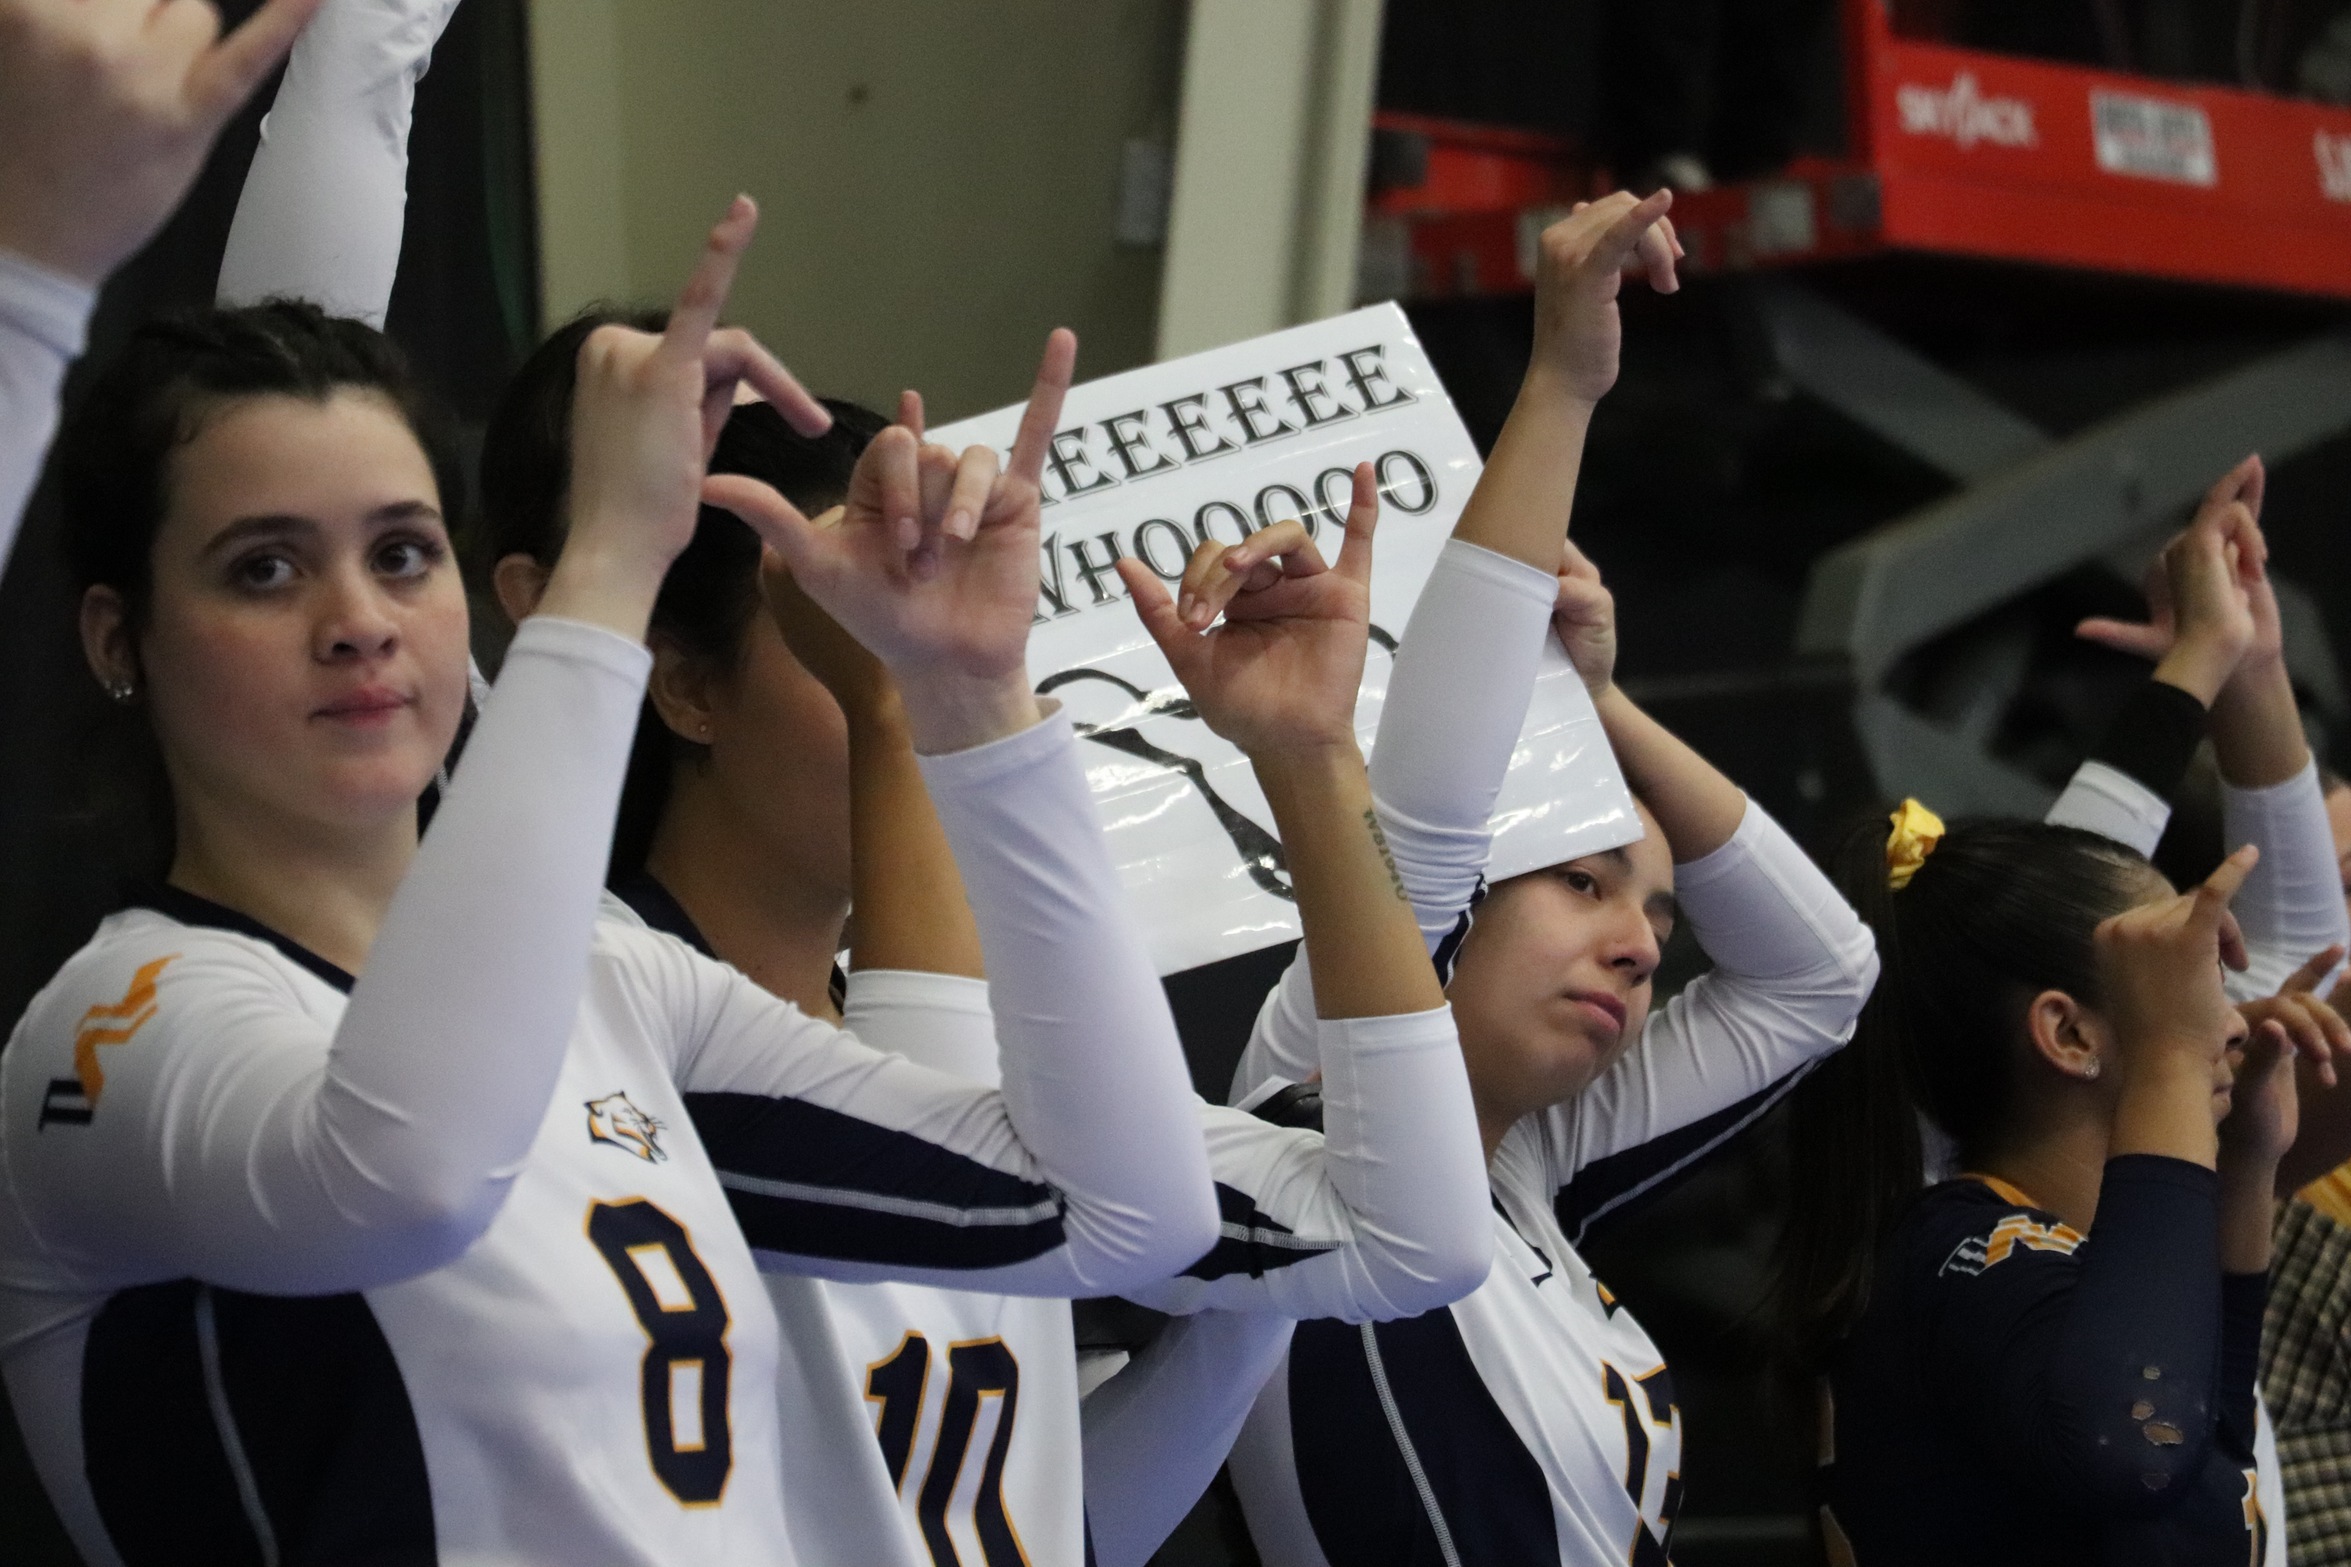 WNCC bench cheering on the Cougars (NJCAA Photo)